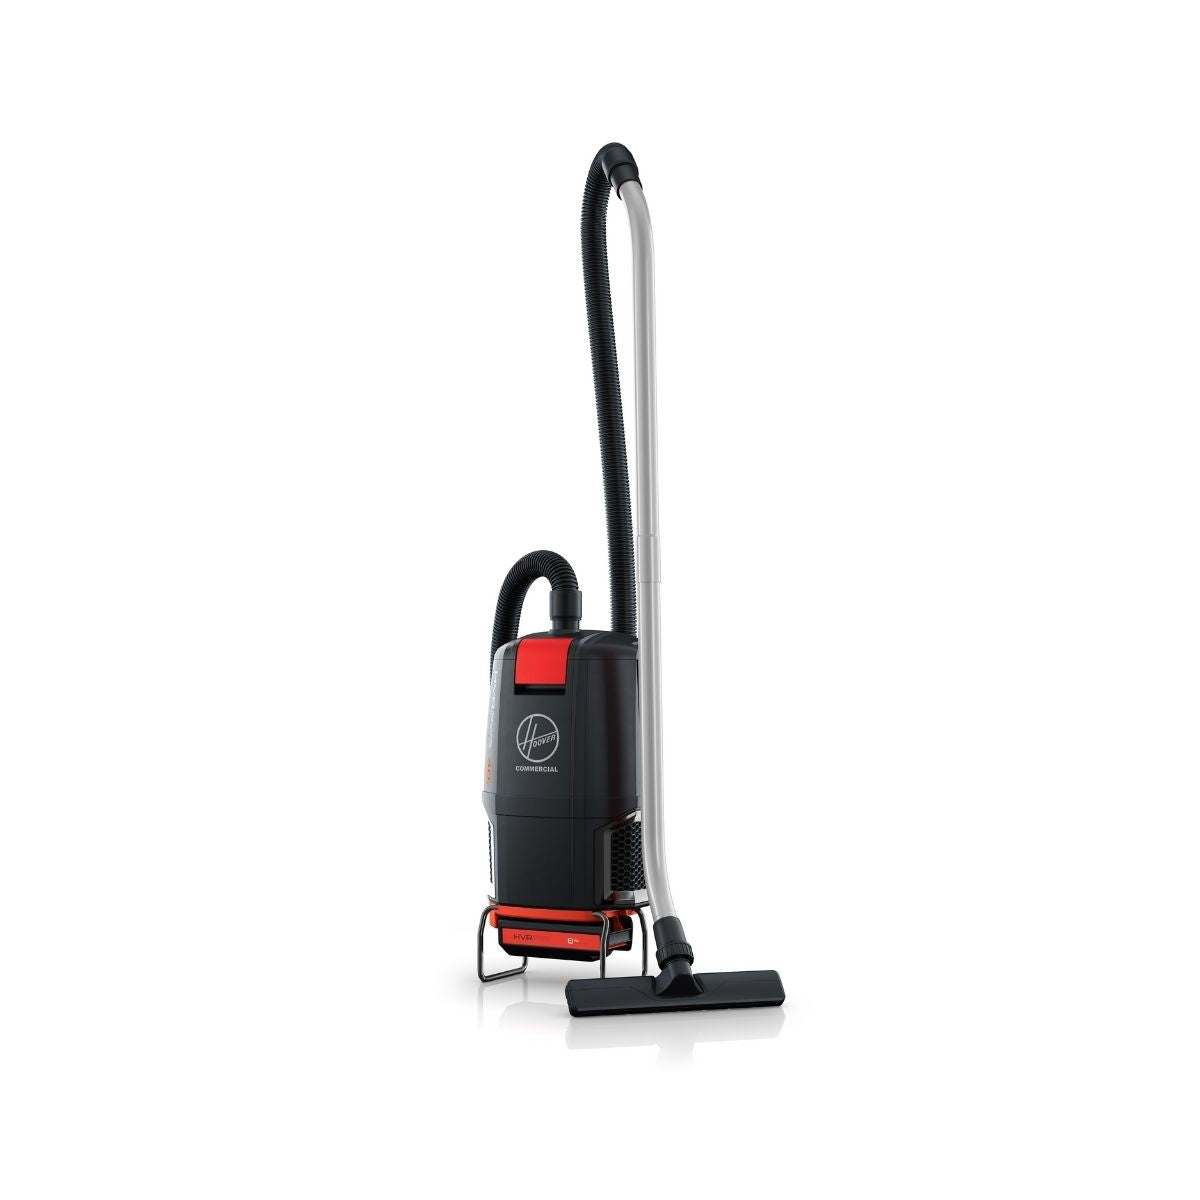 Hoover Vacuum Charger For Hoover Cordless Vacuums